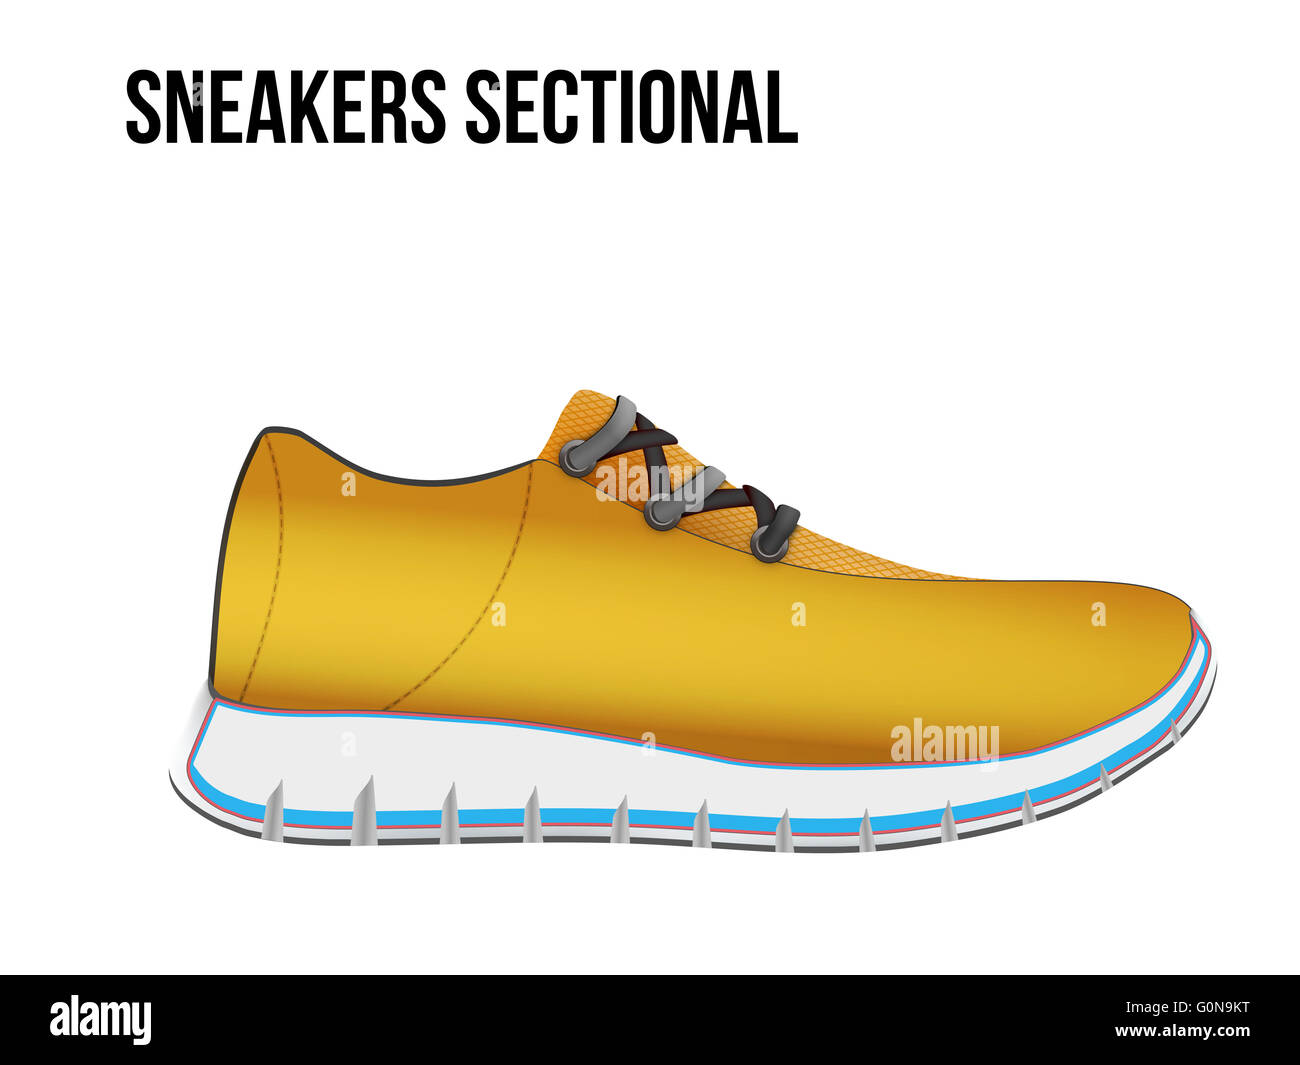 Technical illustration of a shoes sectional. Stock Photo